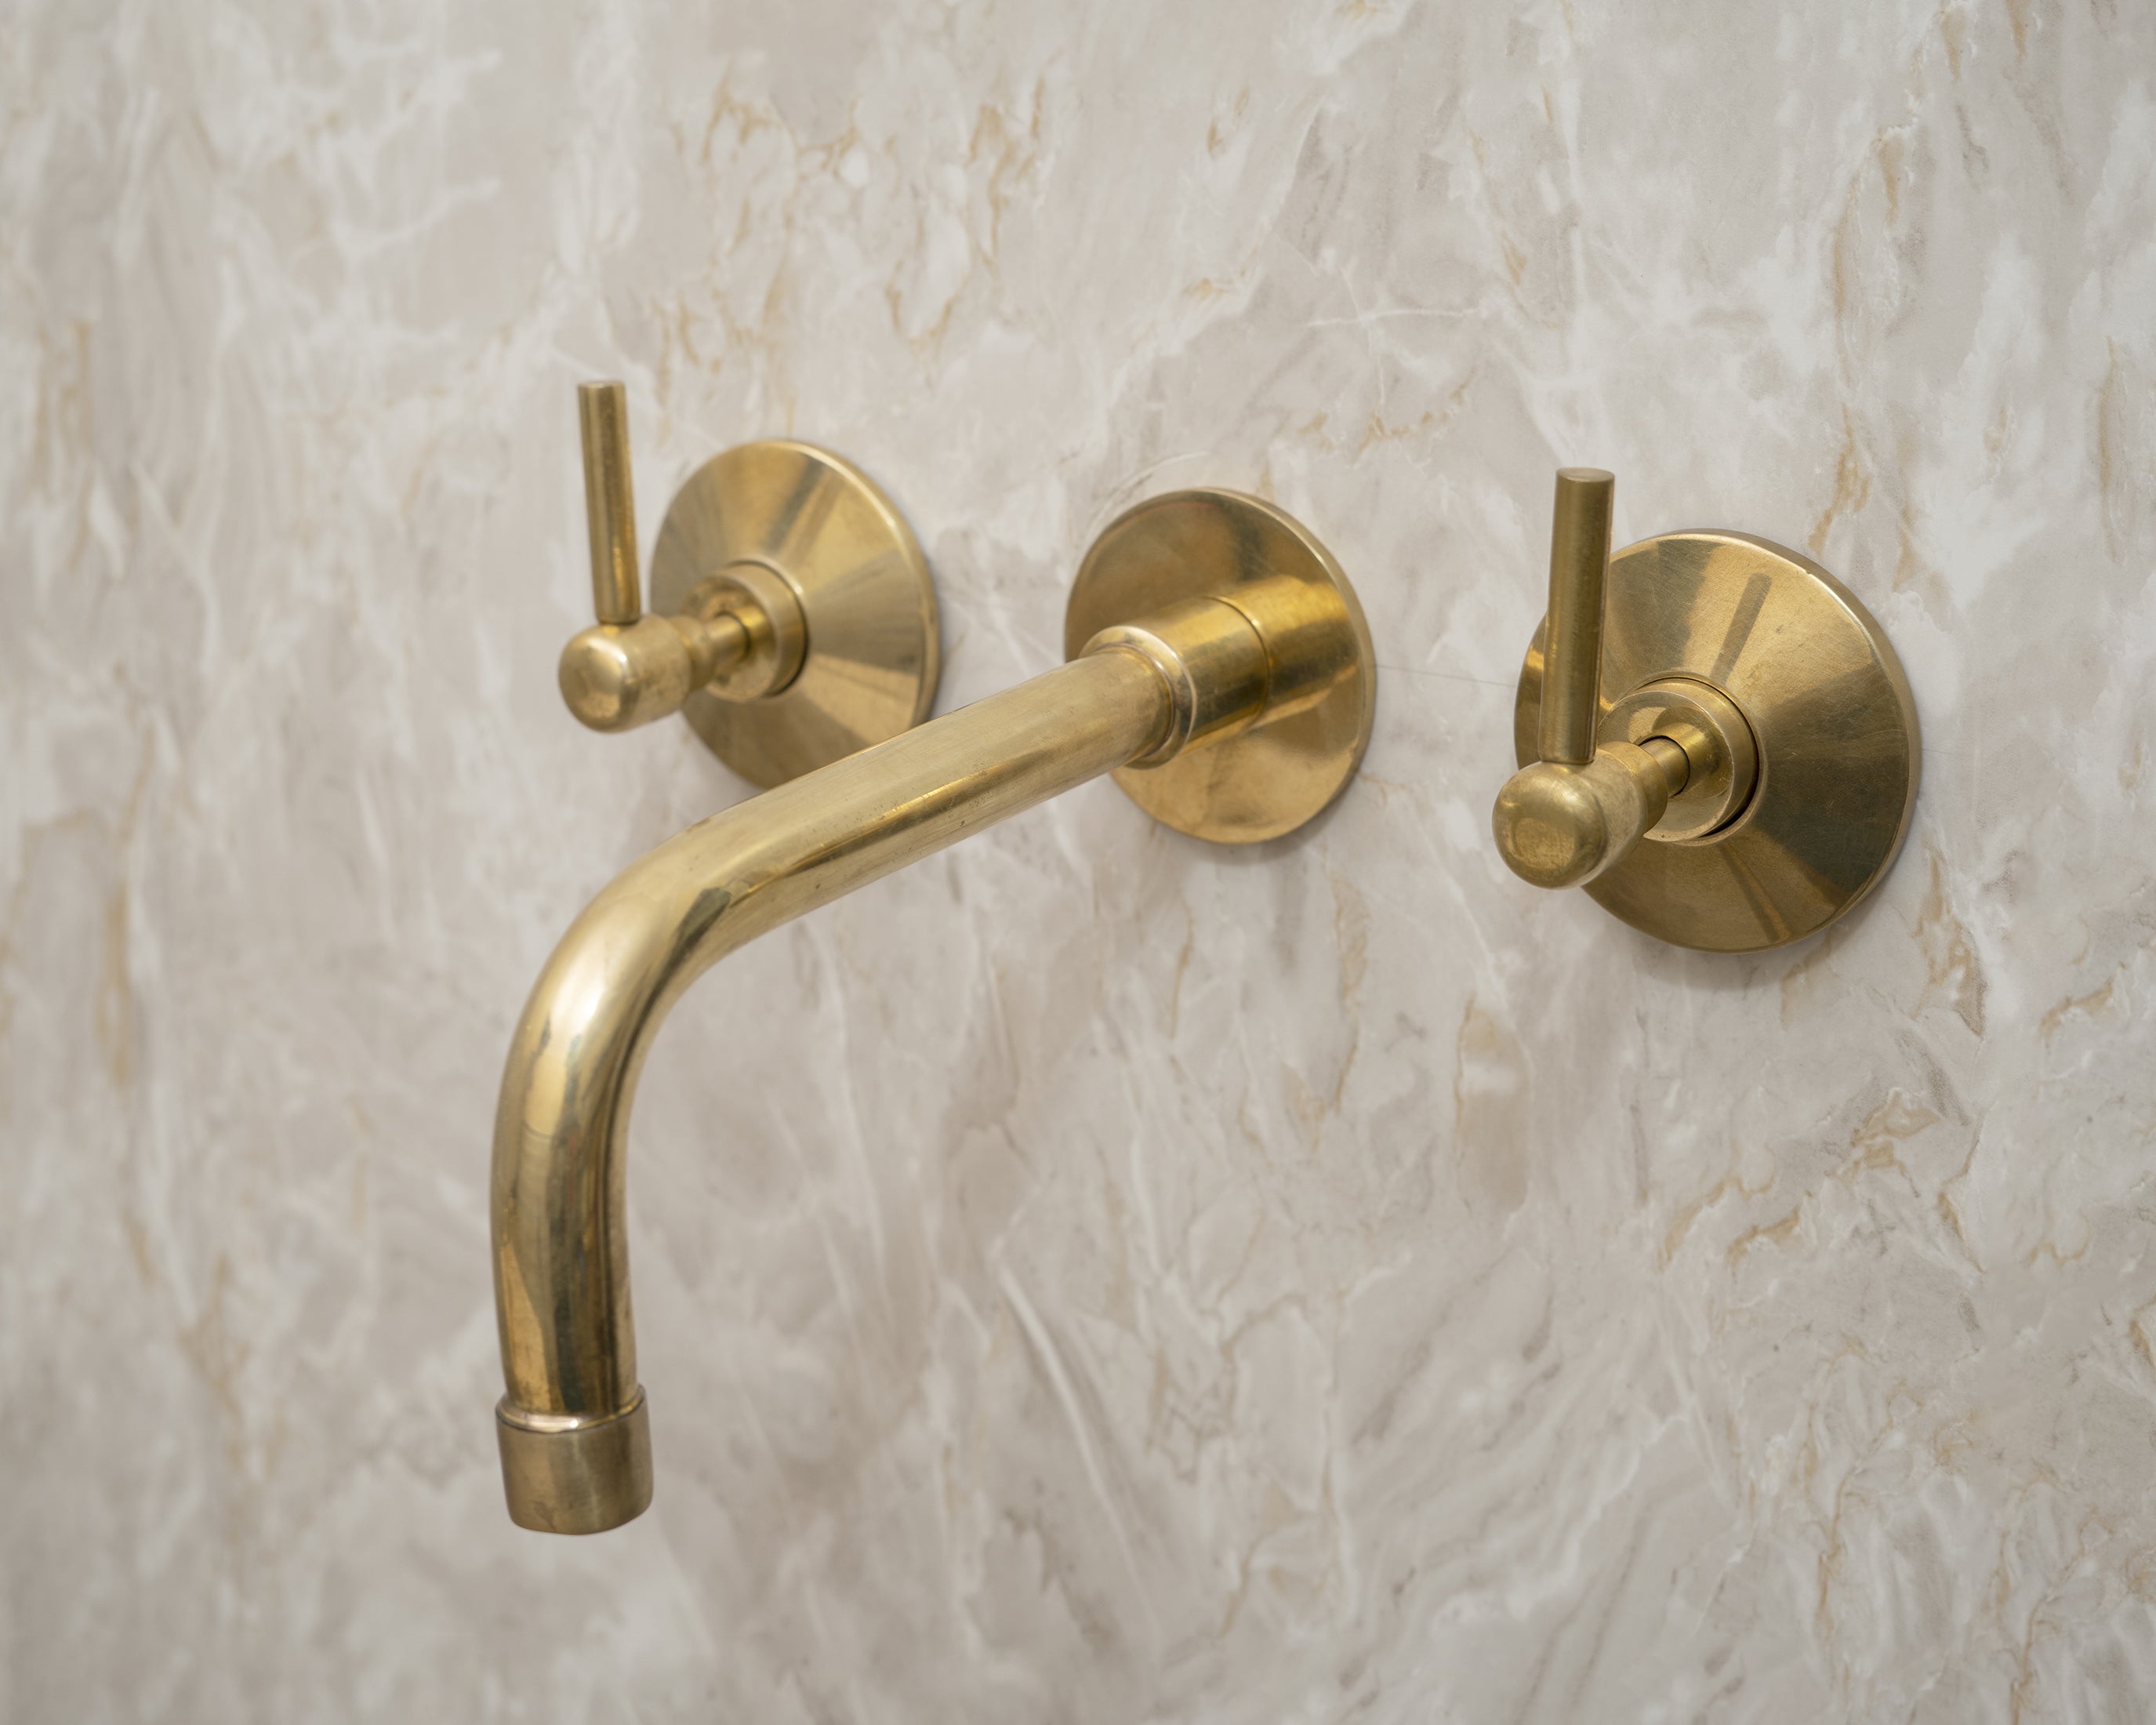 Unlacquered Brass Bathroom Sink Faucet, Handcrafted Brass Wall Mounted Faucet